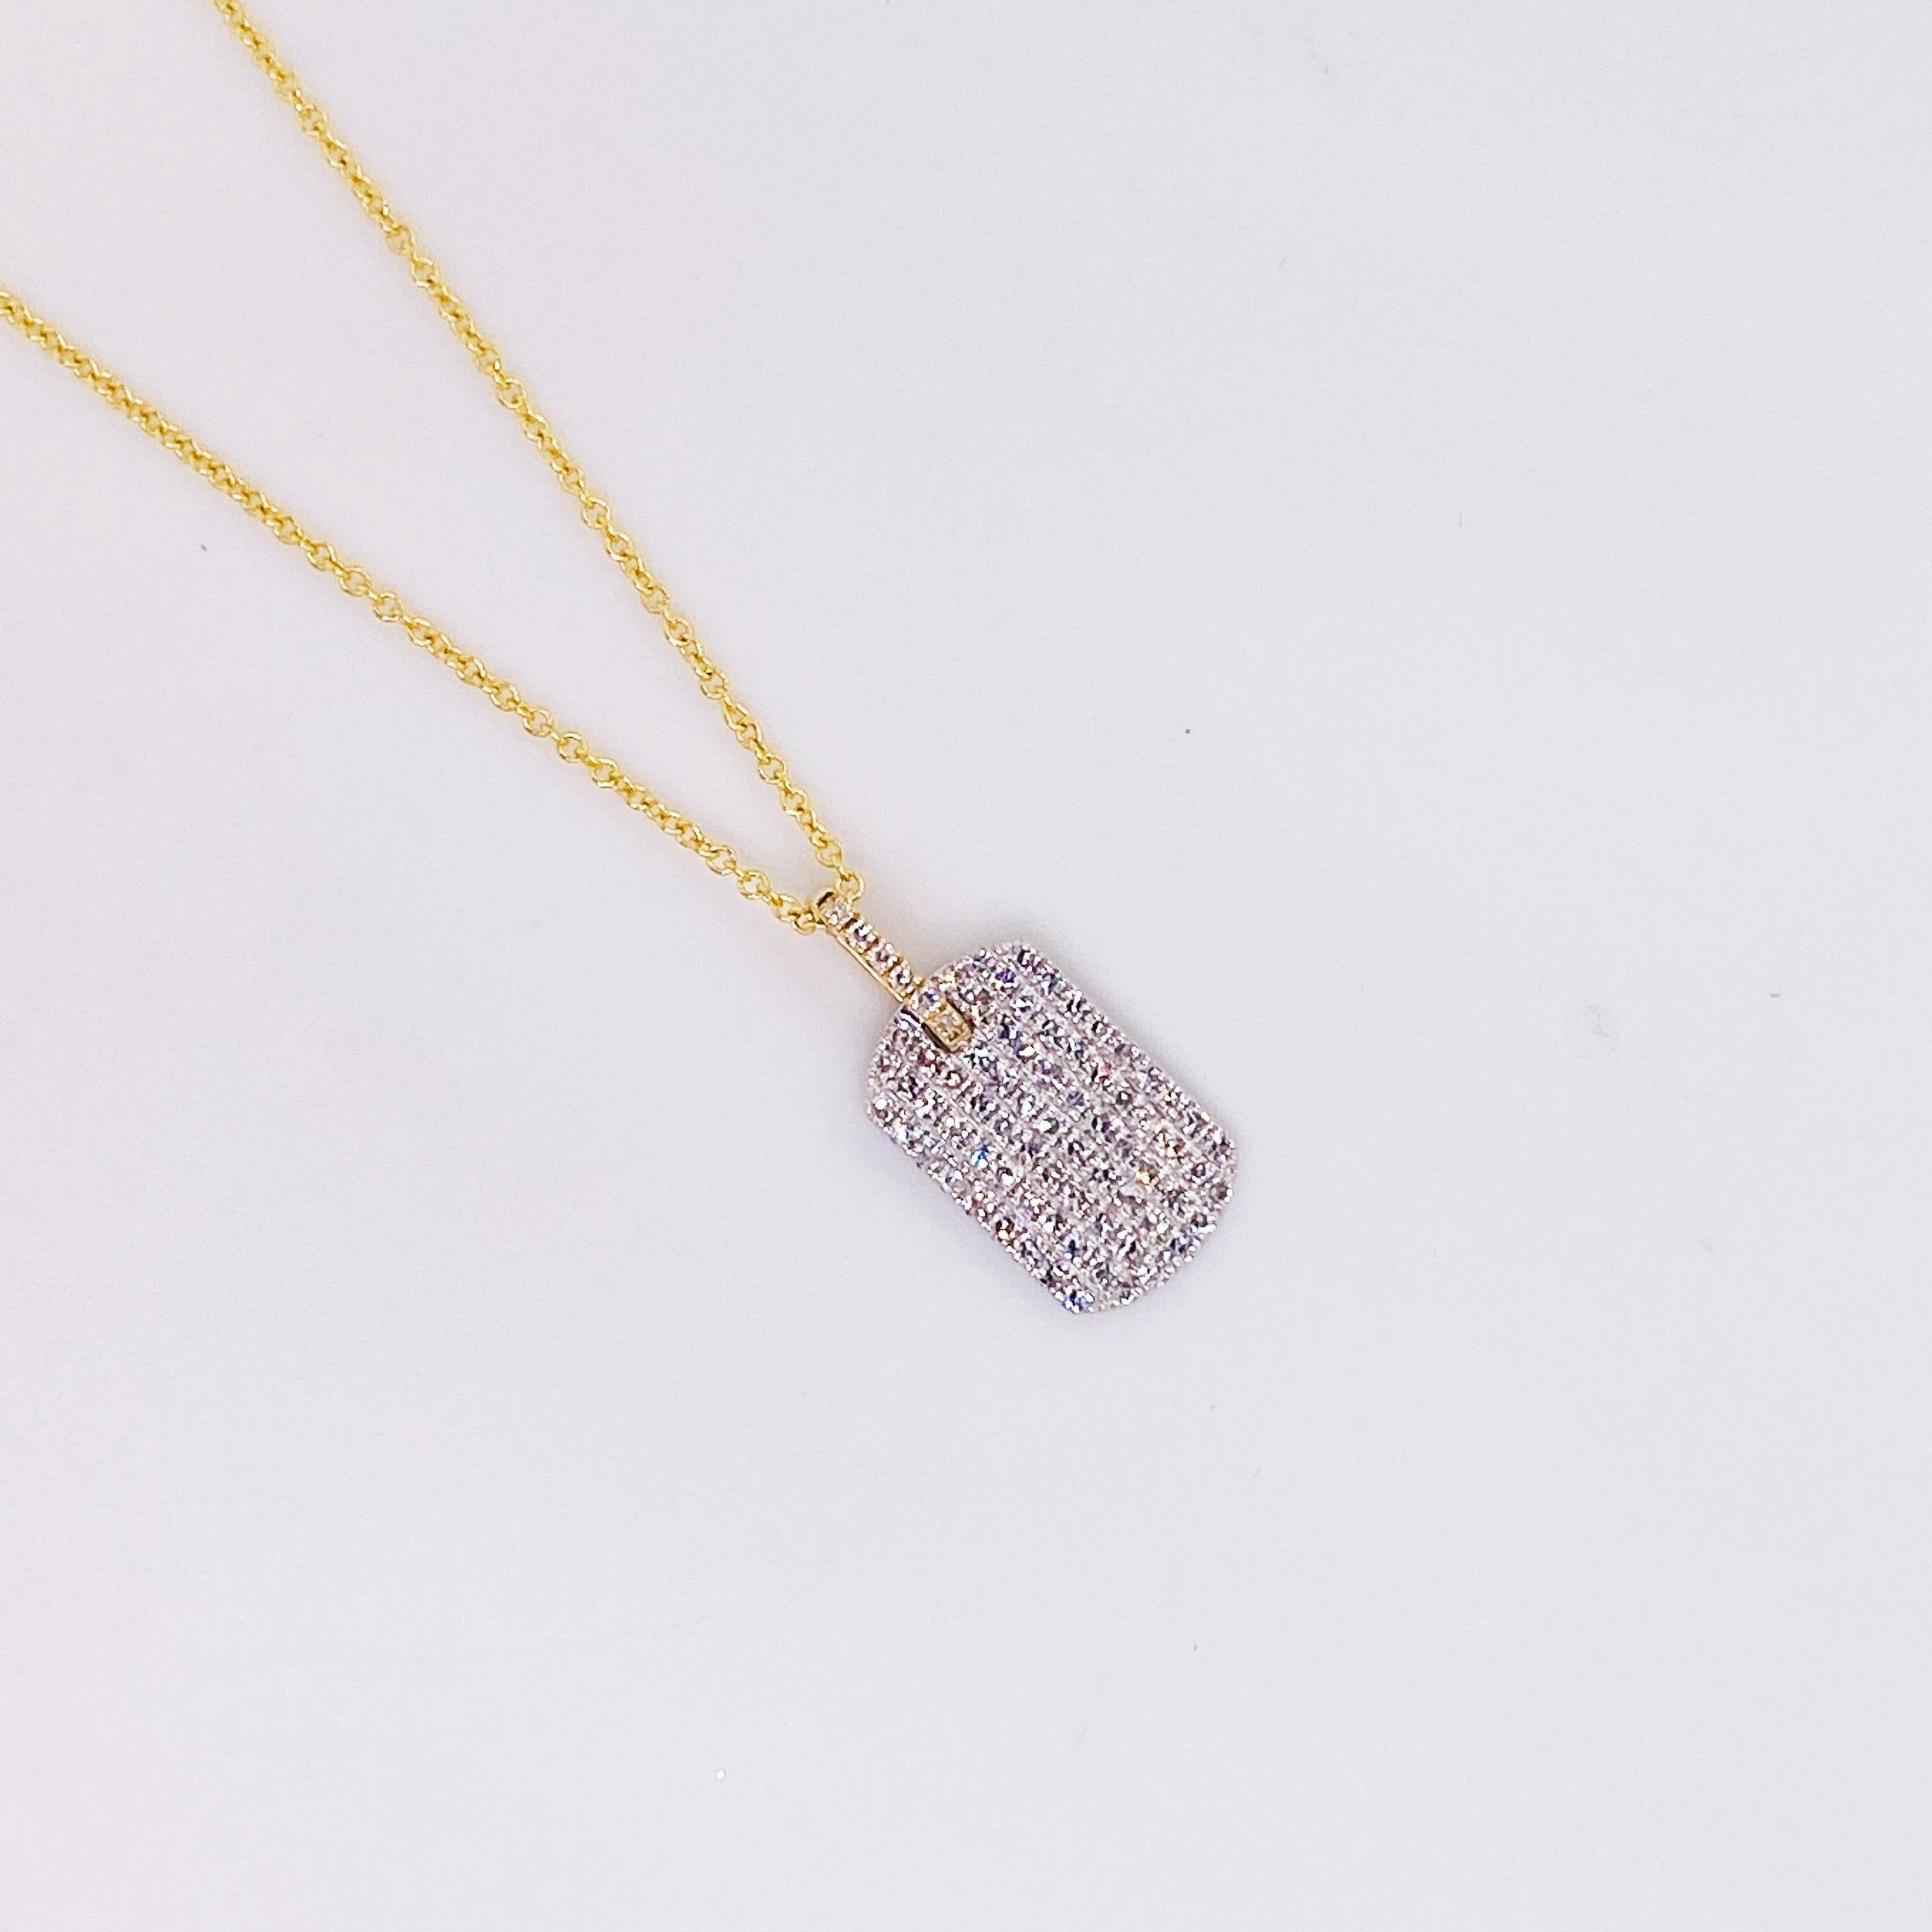 This dog tag pendant has solid 77 diamonds that are pave set. Pave means paved in French and this dog tag is definitely paved with diamonds. It is a lovely pendant alone or layered with other chains and pendants. This necklace can help create a